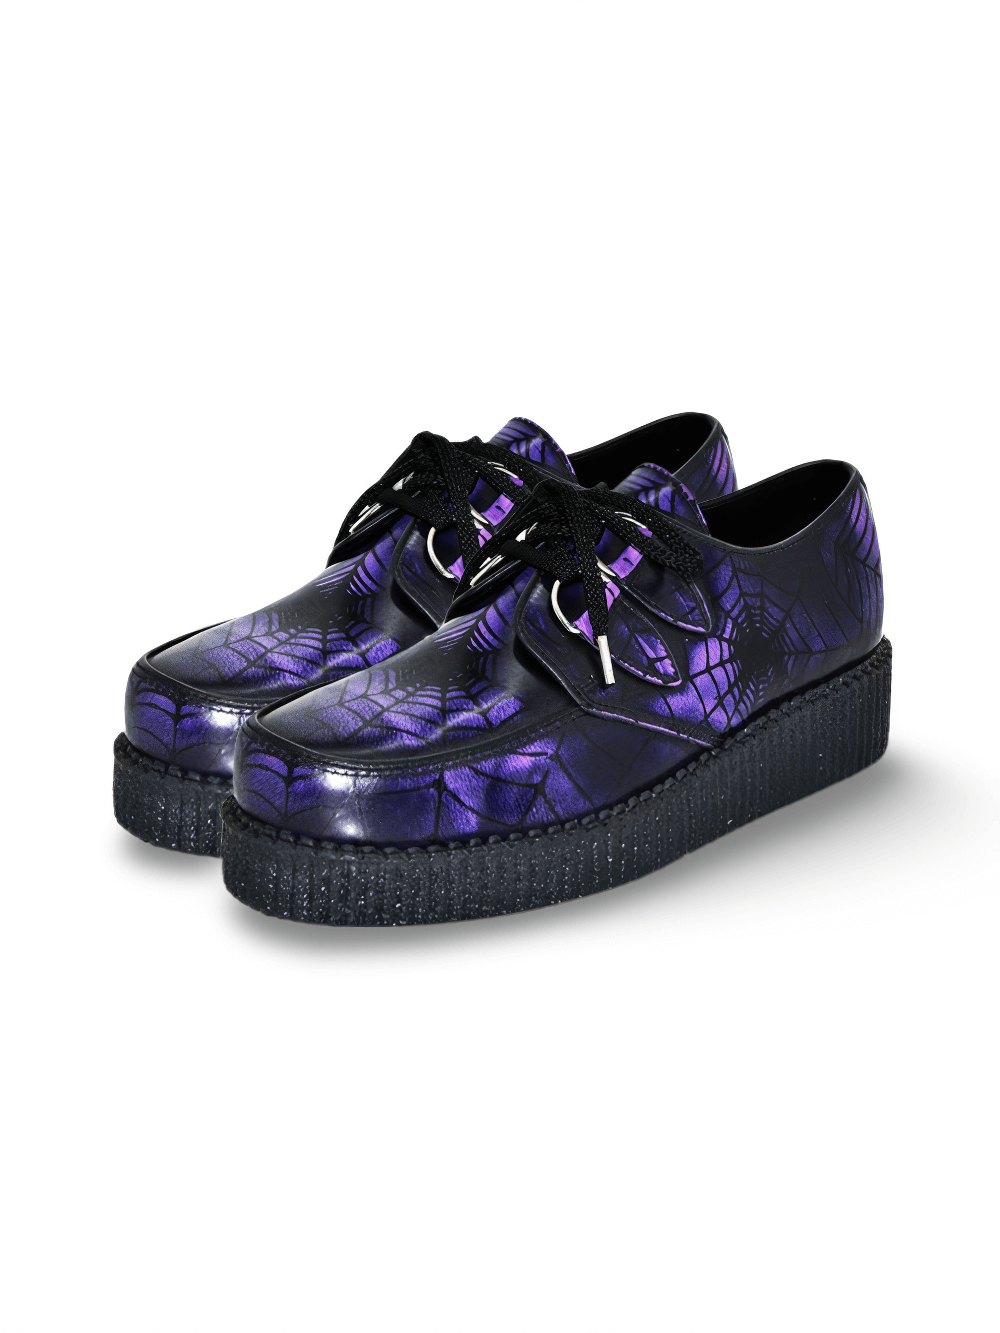 Gothic Unisex Leather Creepers Featuring Spider Design